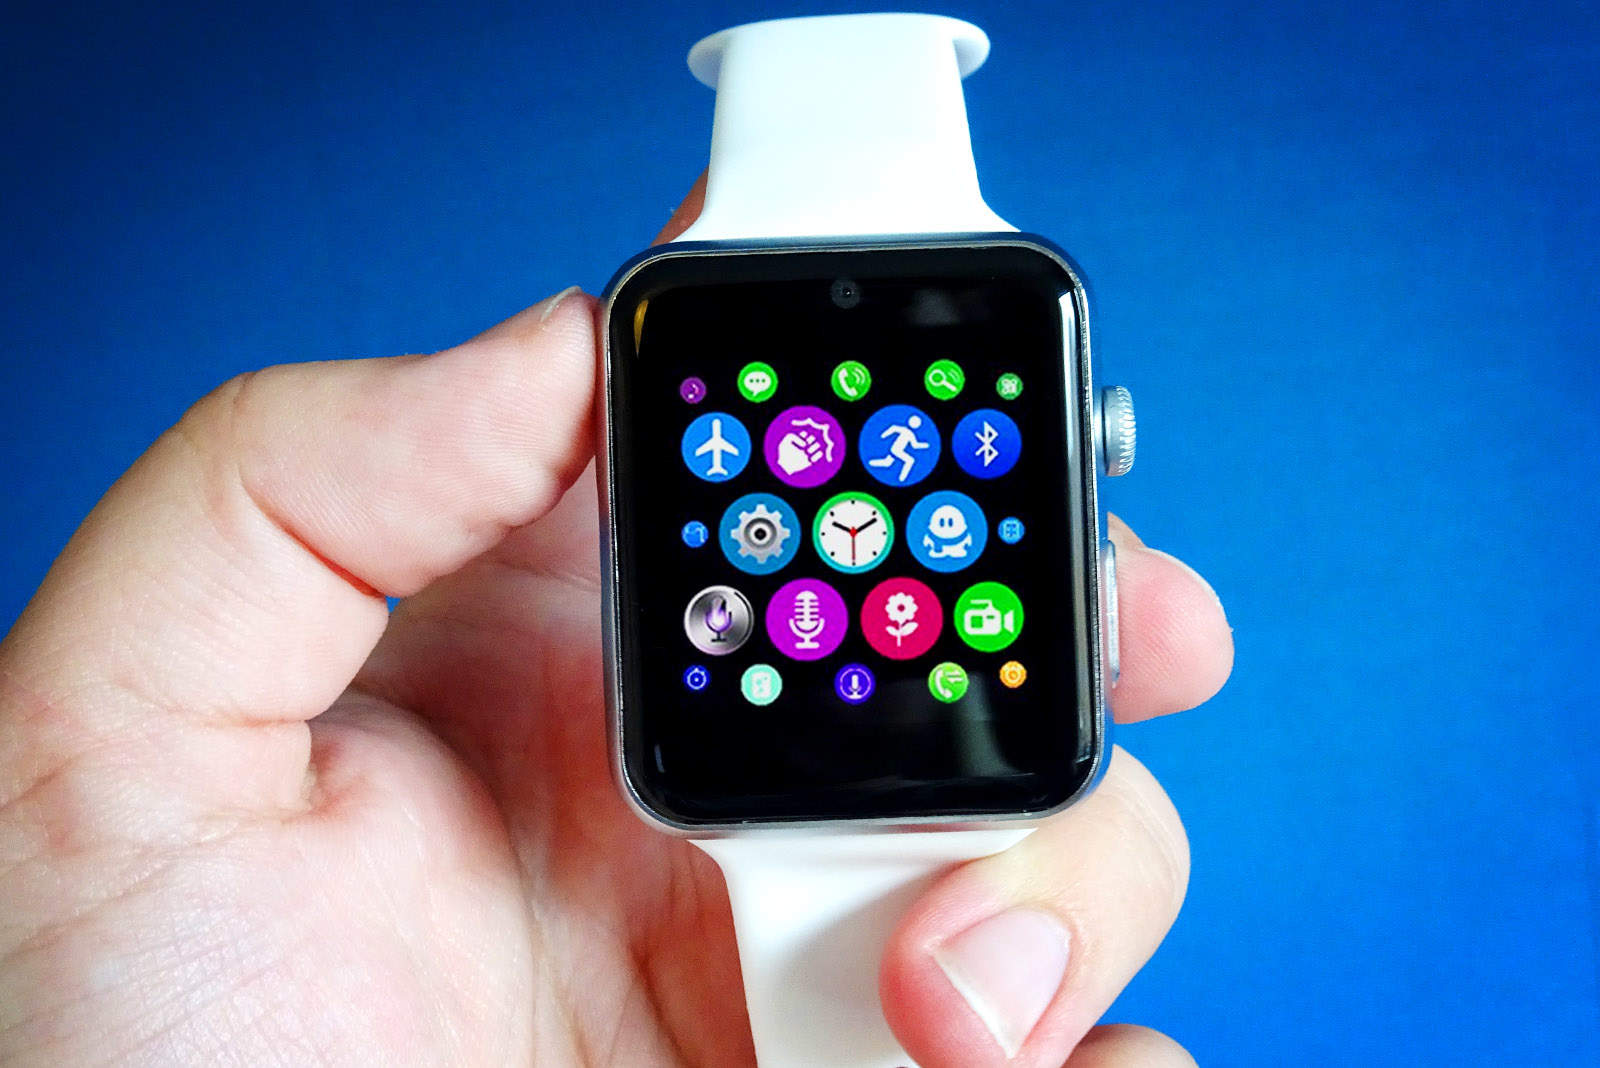 Chinese Apple Watch clone costs just $63, but is it any good?